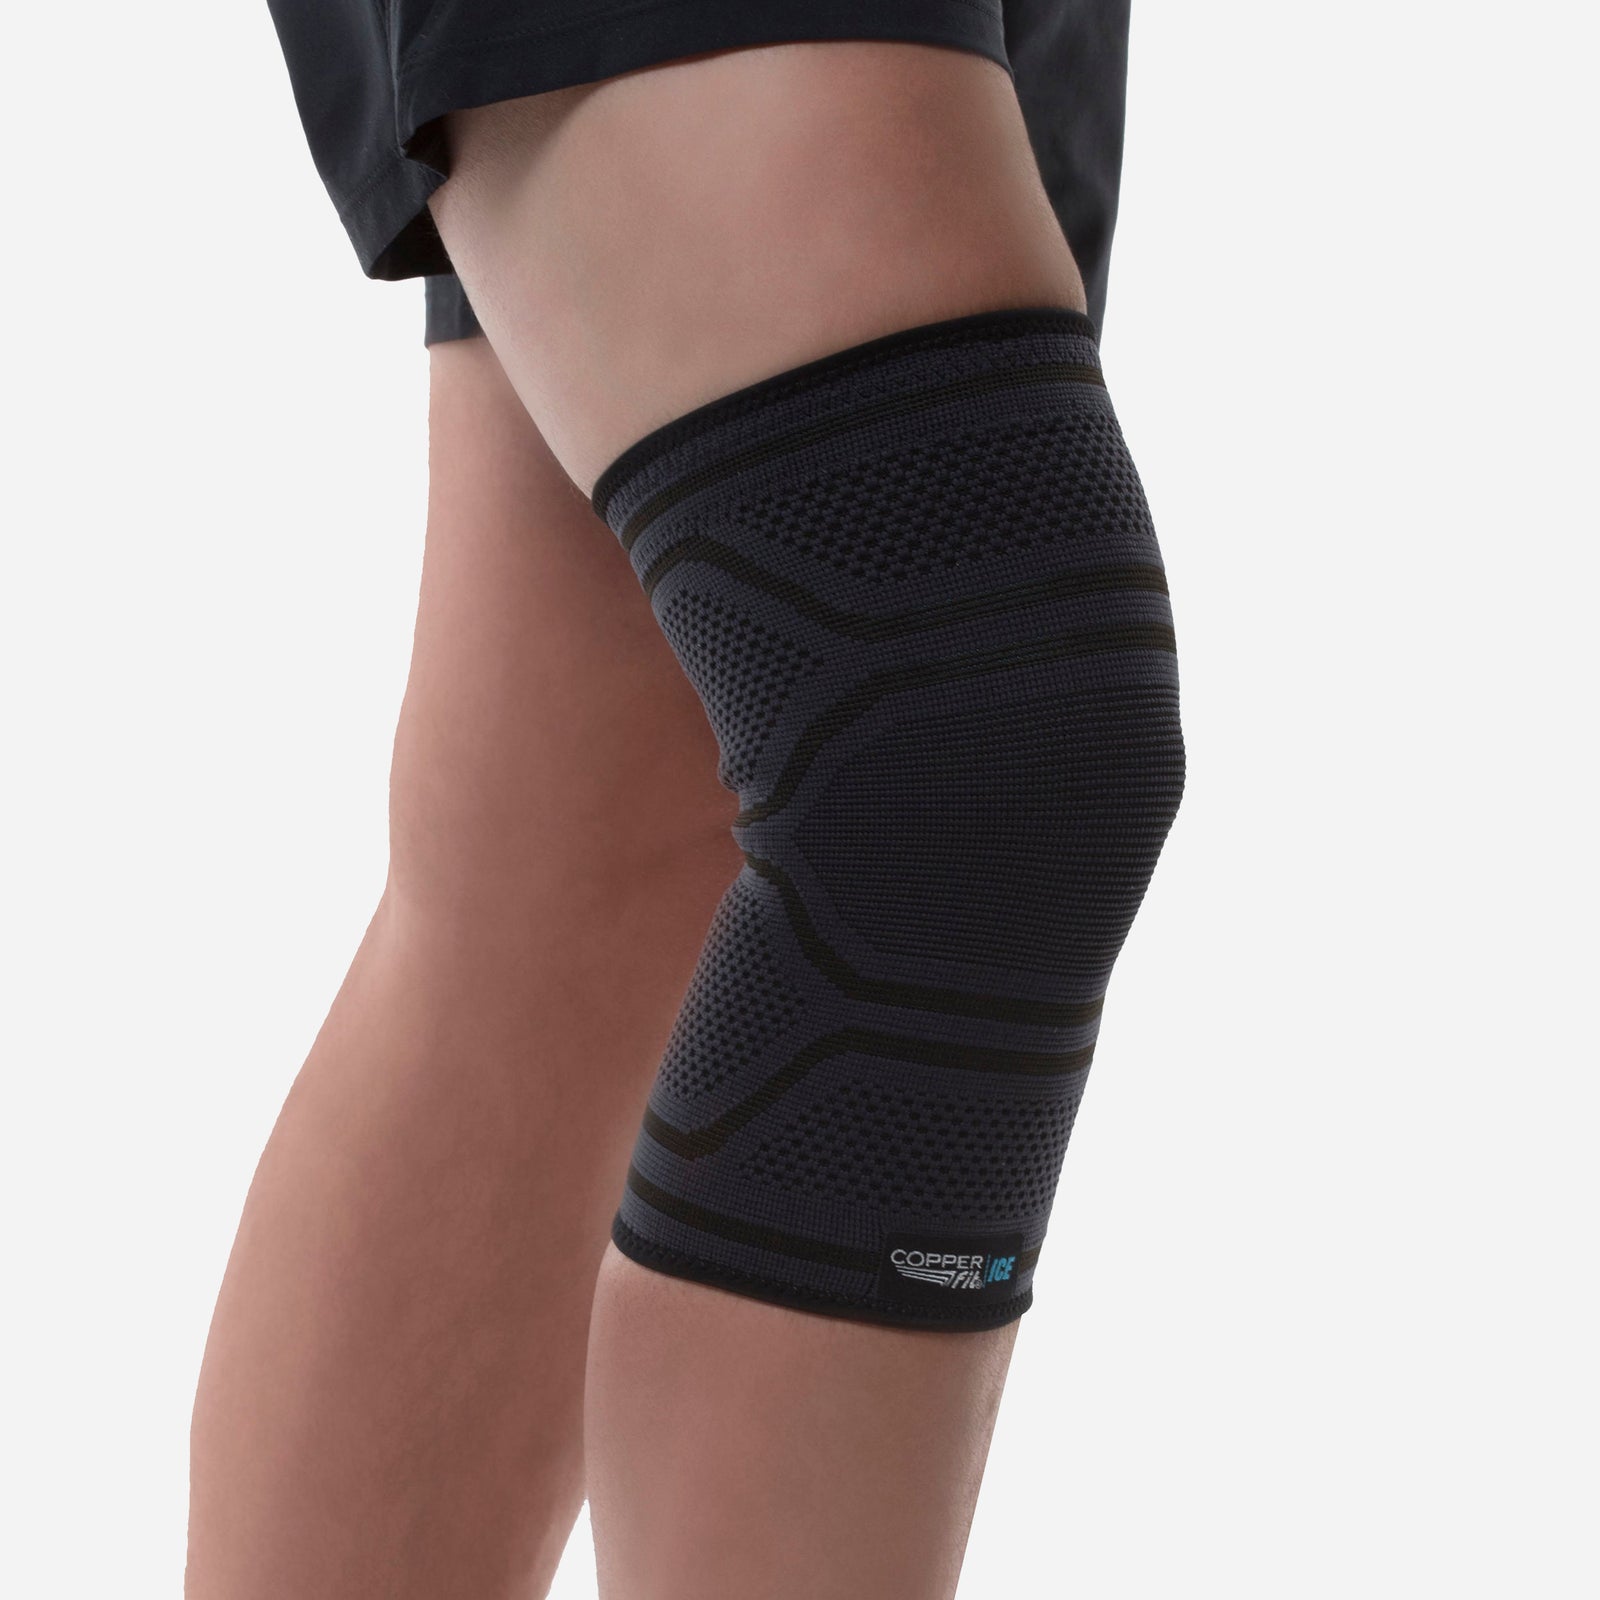 Copper Joe Full Leg Compression Sleeve - Support for Knee, Thigh, Calf,  Arthritis, Running and Basketball. Single Leg Pant - Small